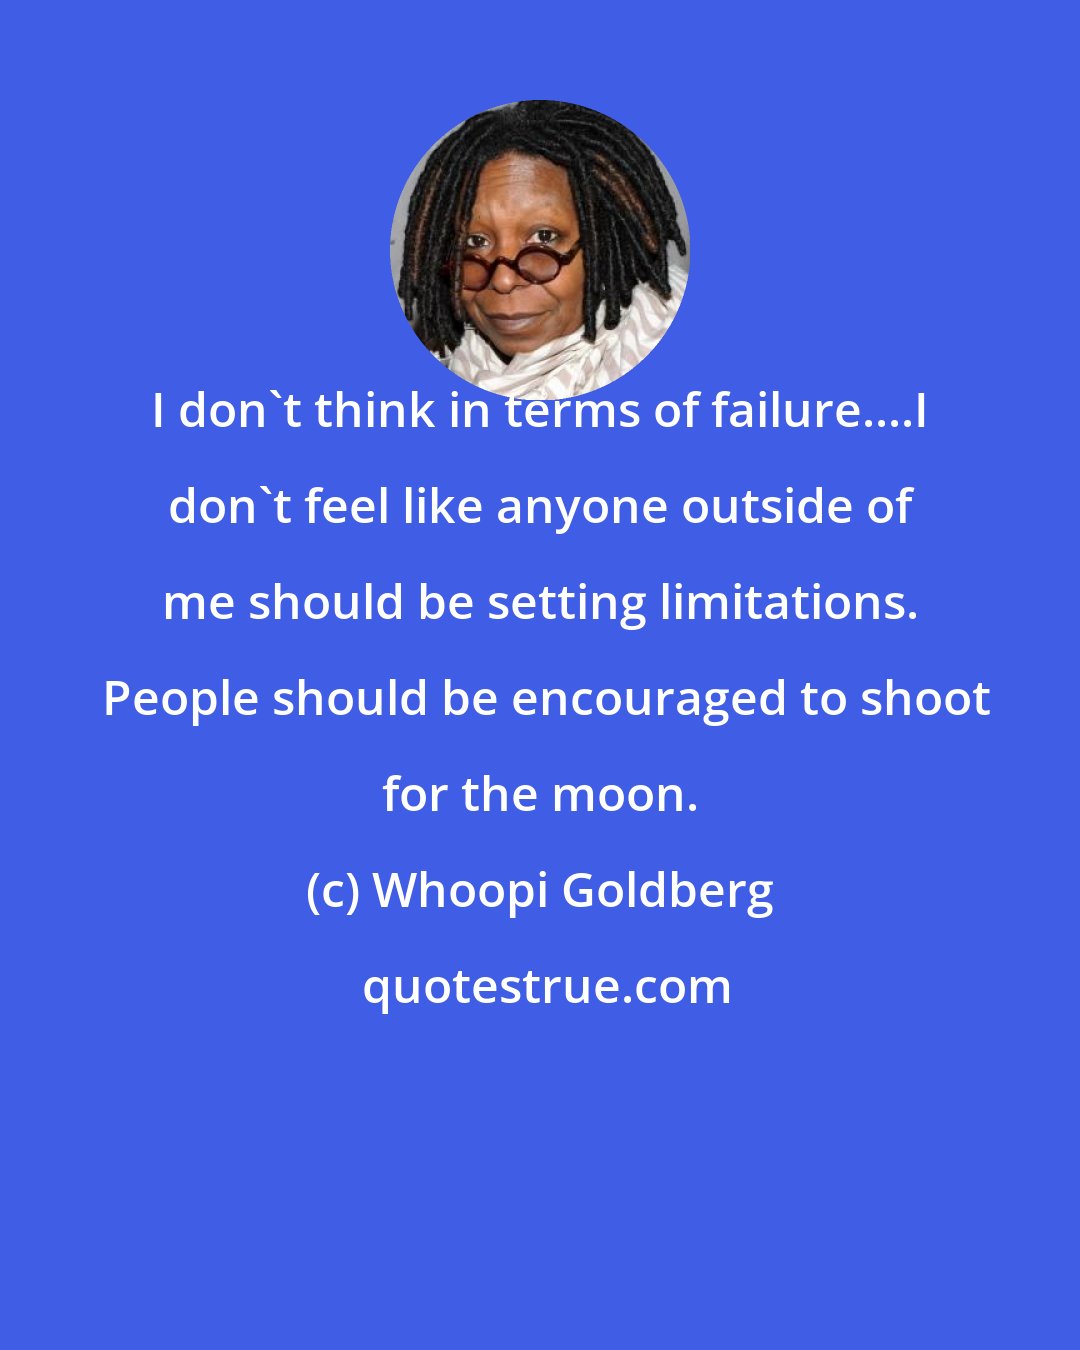 Whoopi Goldberg: I don't think in terms of failure....I don't feel like anyone outside of me should be setting limitations.  People should be encouraged to shoot for the moon.